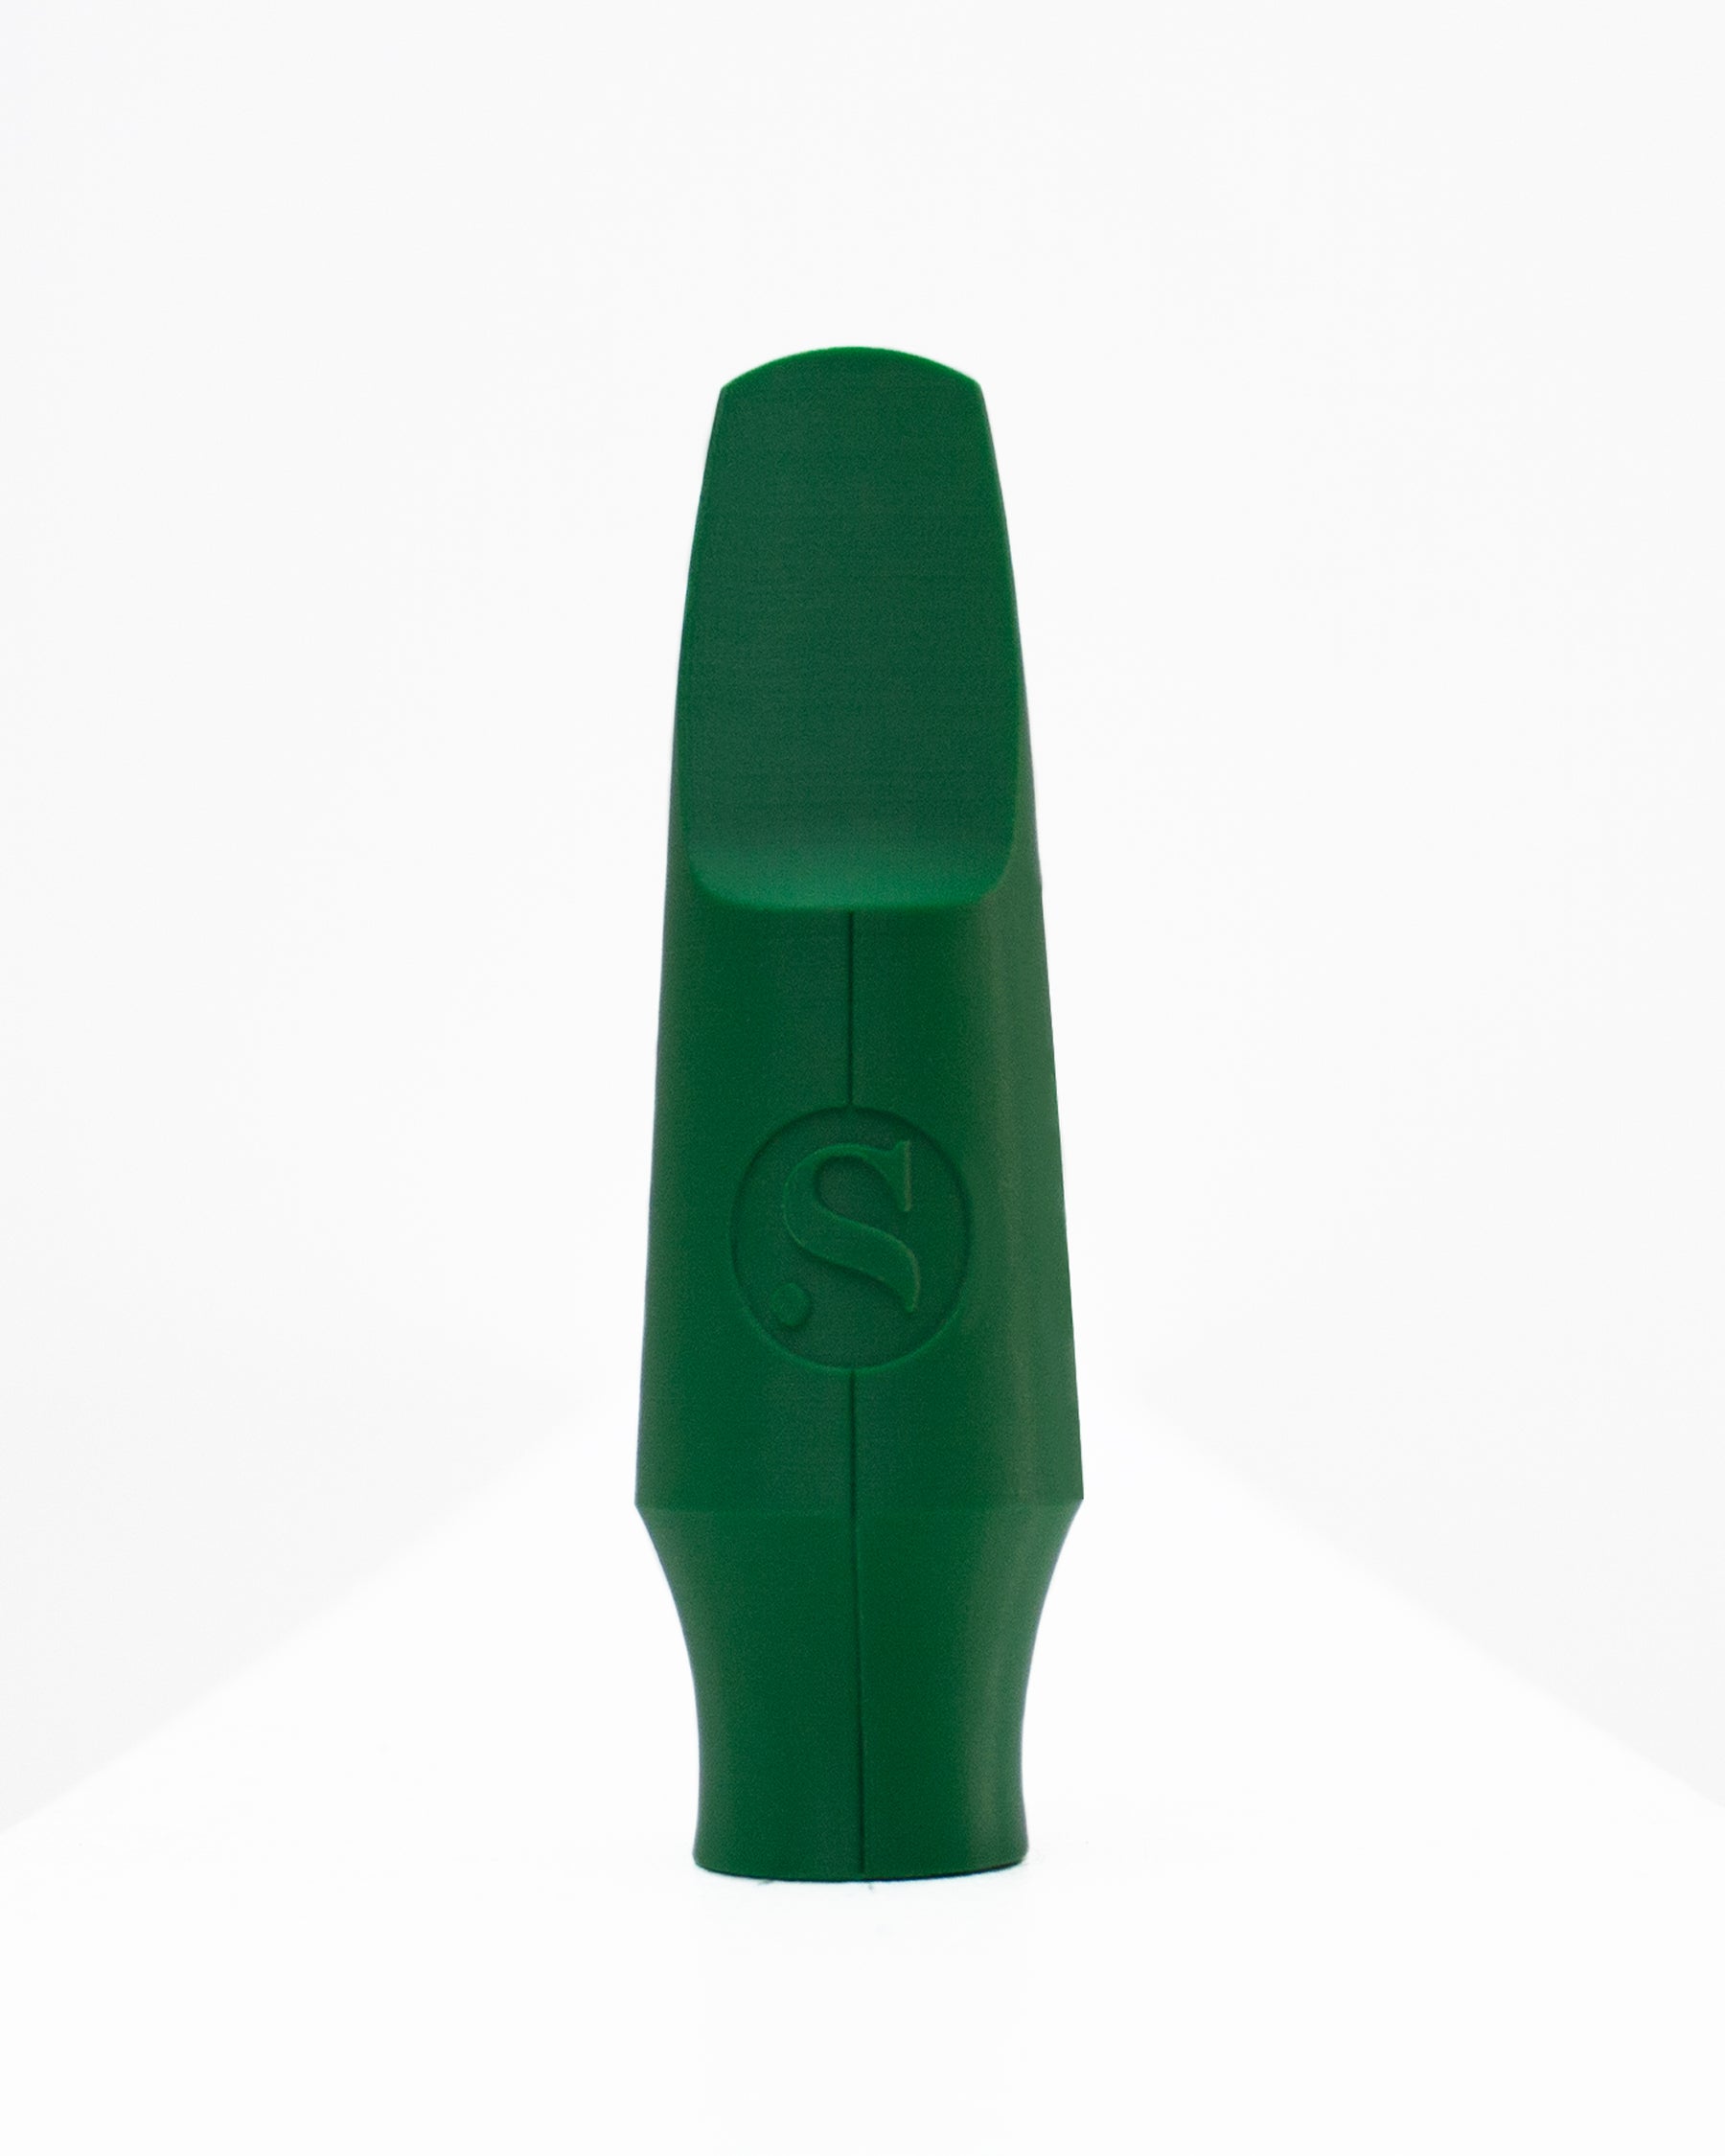 Tenor Signature Saxophone mouthpiece - Eddie Rich by Syos - 9 / Forest Green